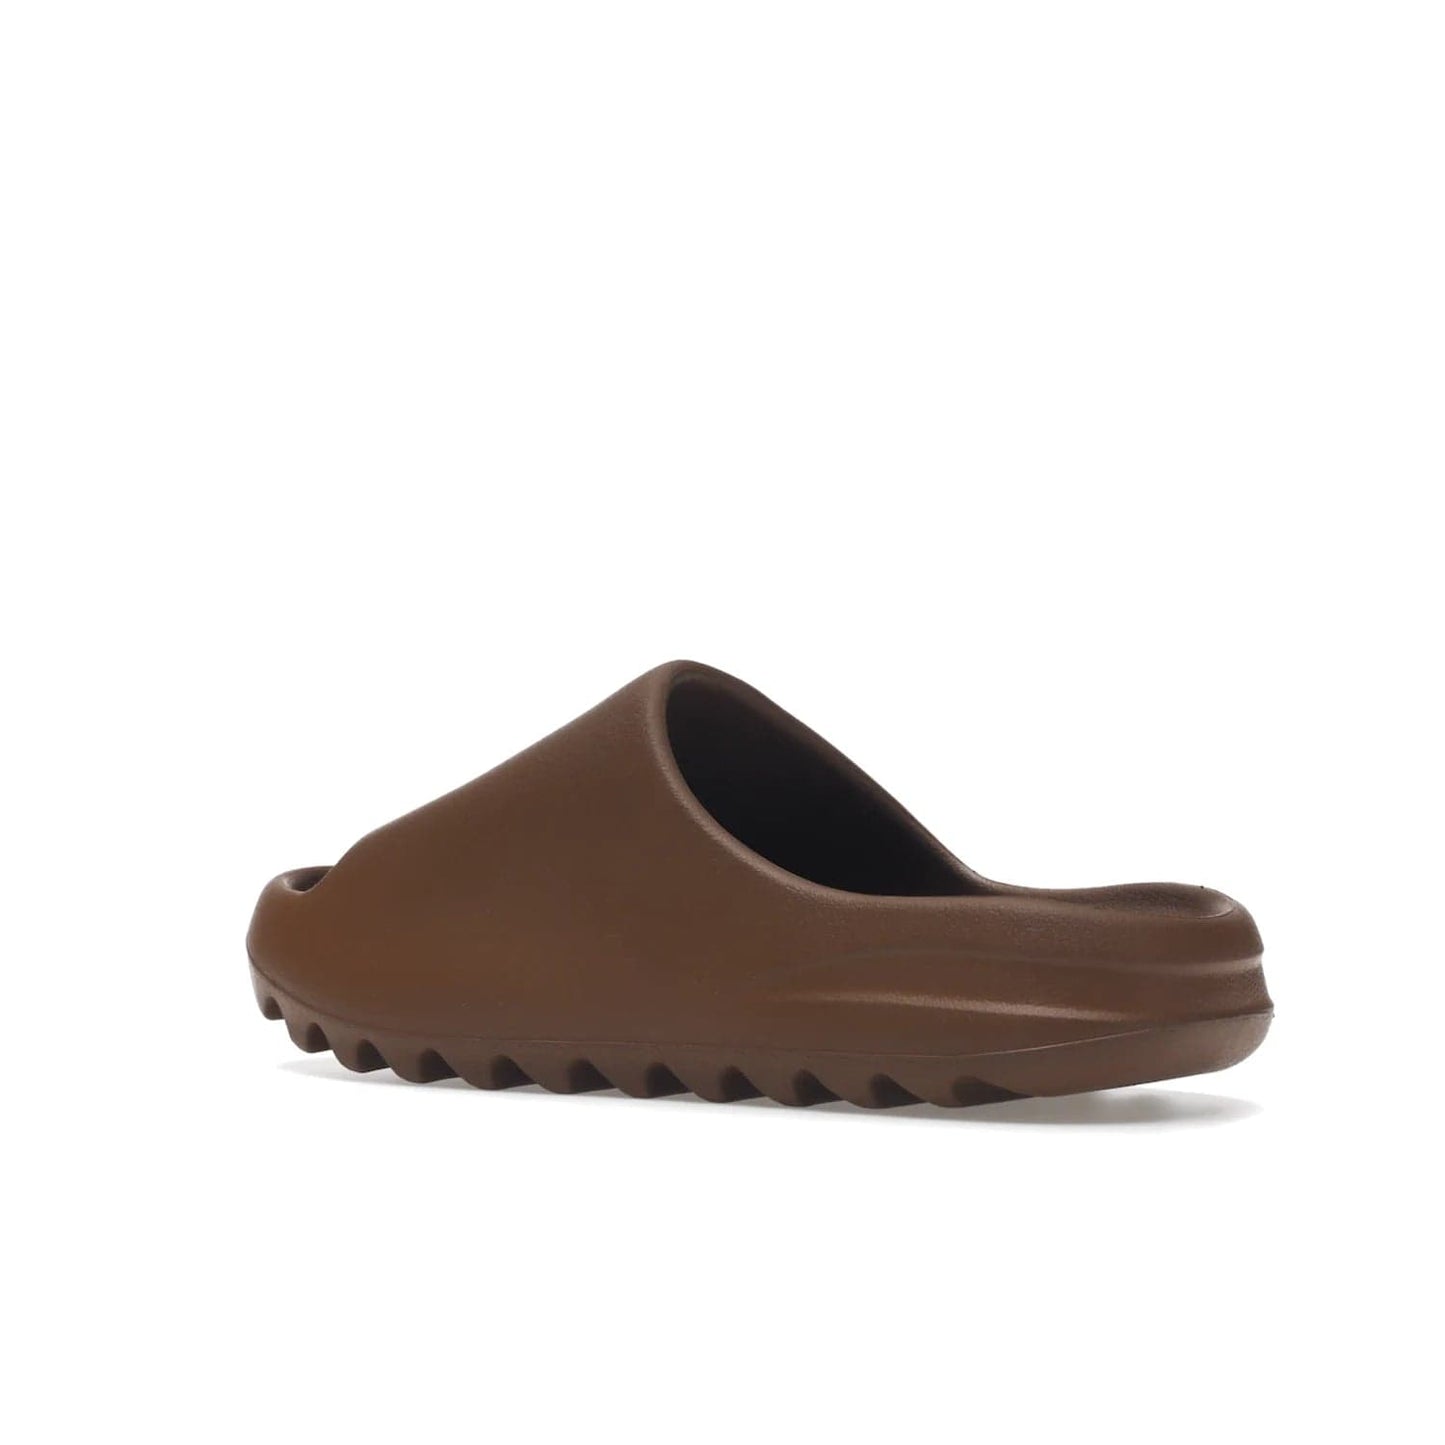 adidas Yeezy Slide Flax - Image 23 - Only at www.BallersClubKickz.com - Score the perfect casual look with the adidas Yeezy Slide Flax. Made with lightweight injected EVA plus horizontal grooves underfoot for traction. Release on August 22, 2022. $70.